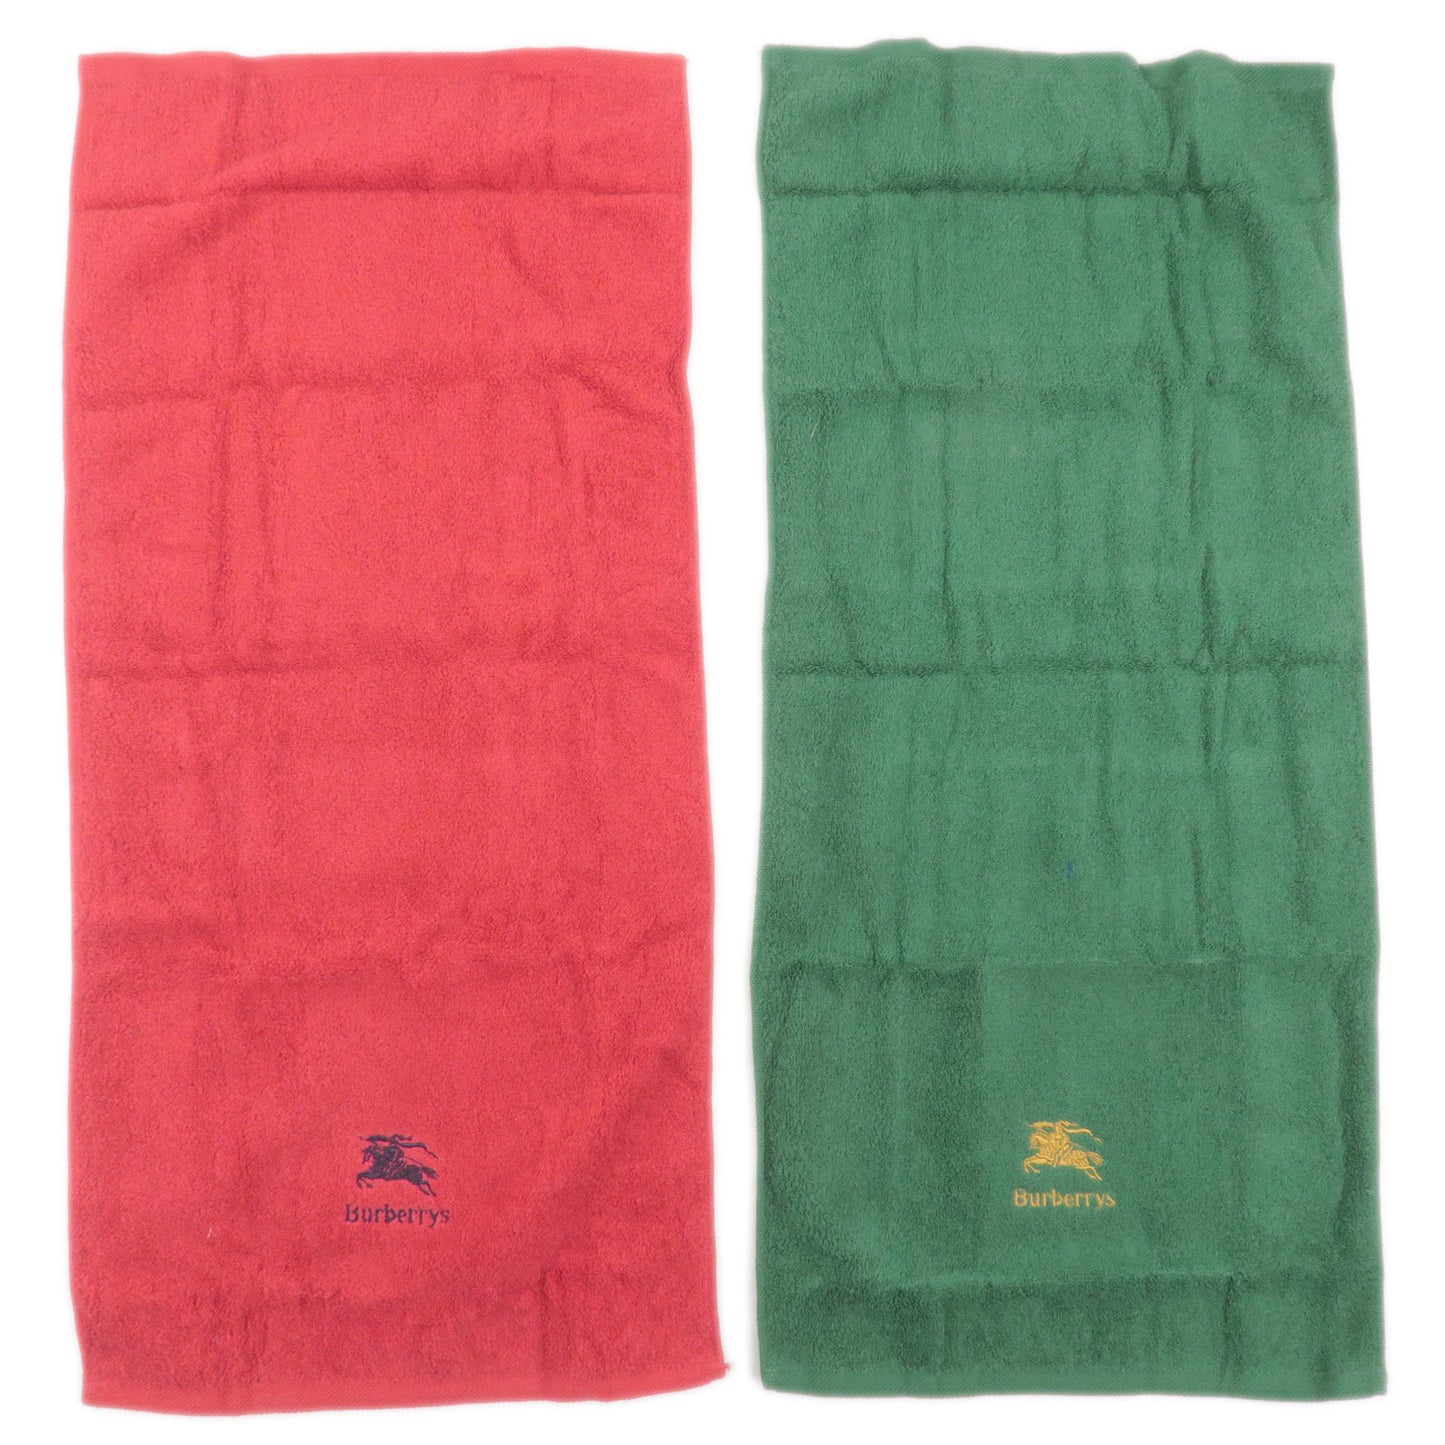 BURBERRY-Towel-Set-Small-Towel-100%-Cotton-Red-Green